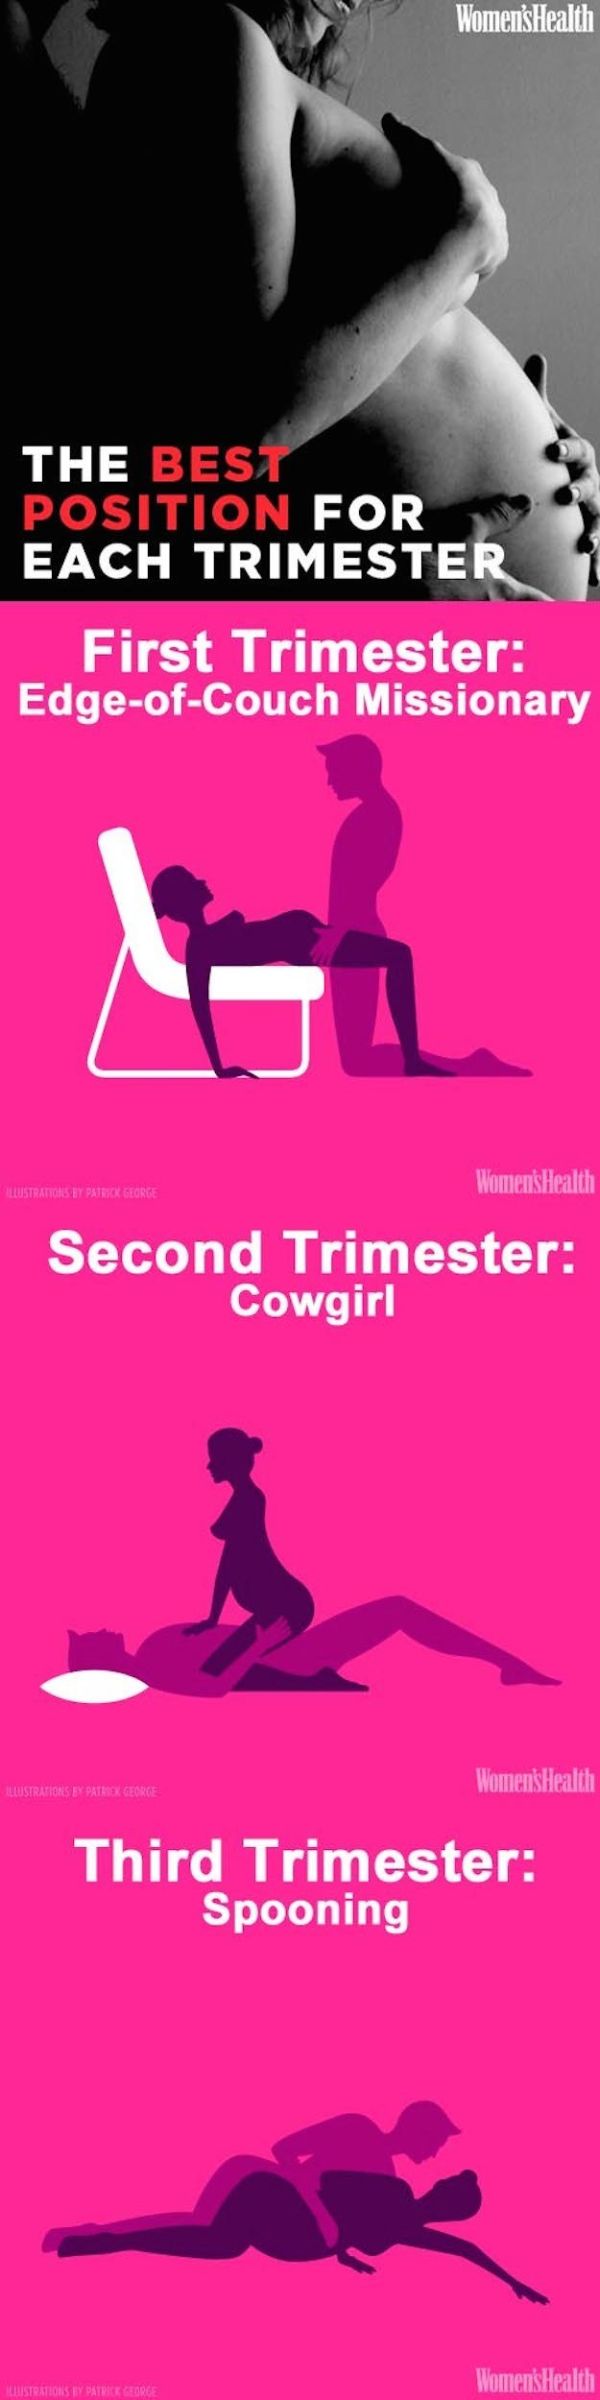 These Diagrams Were Designed To Make Your Sex Life Better 22 Pics